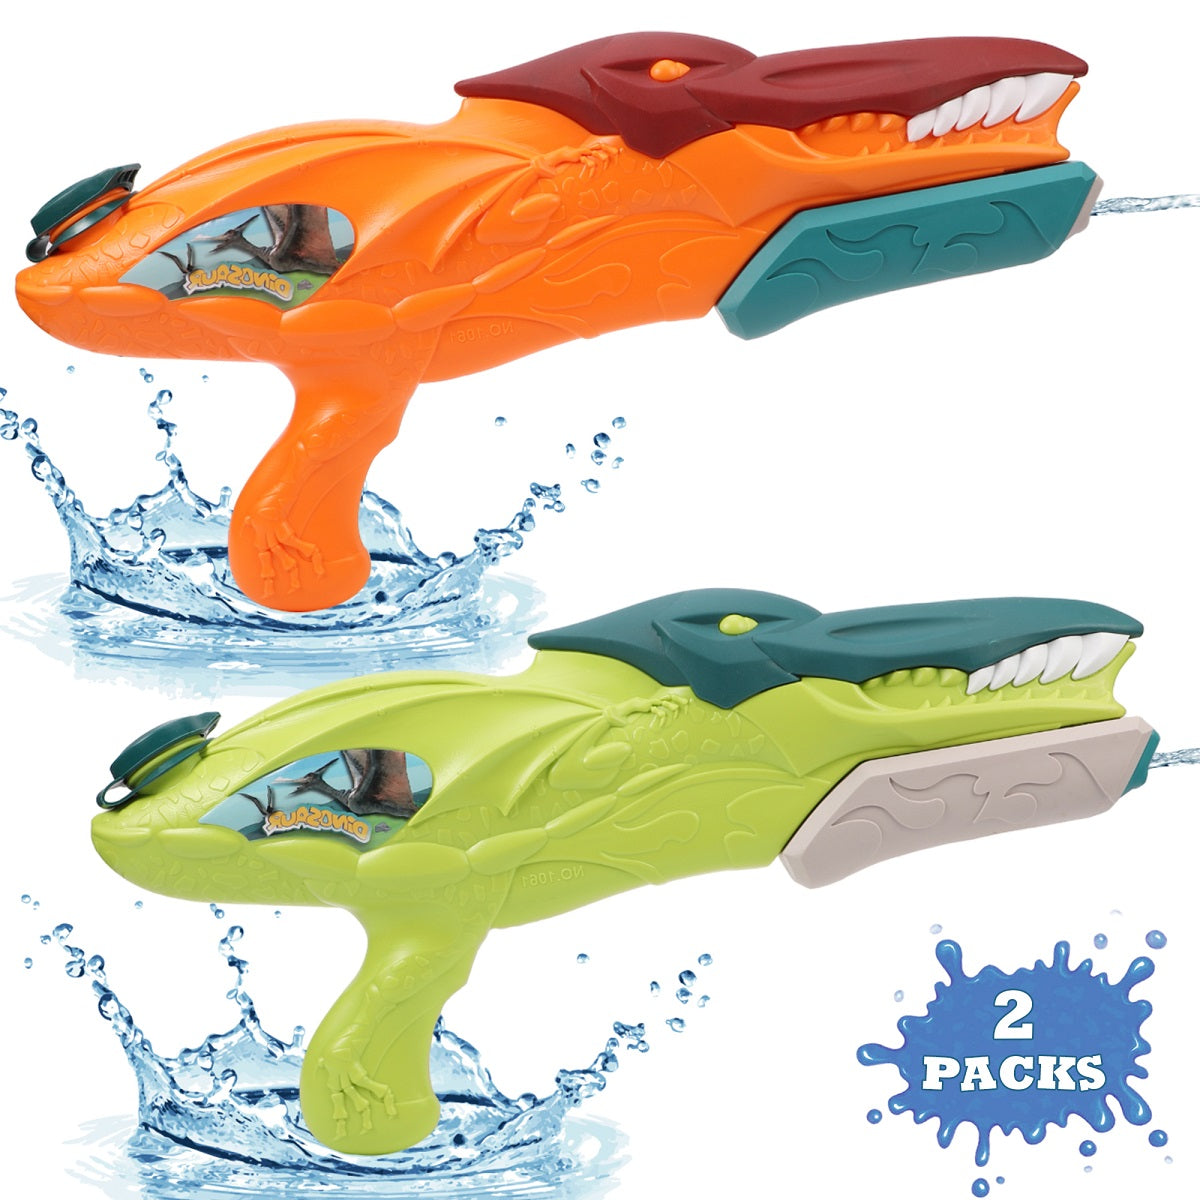 2 Pack Water Guns for Kids,Dinosuar Squirt Water Blaster Guns Toy Summer Swimming Pool Beach Sand Outdoor Water Fighting Play Toys Gifts for Boys Girls(Green & Orange)